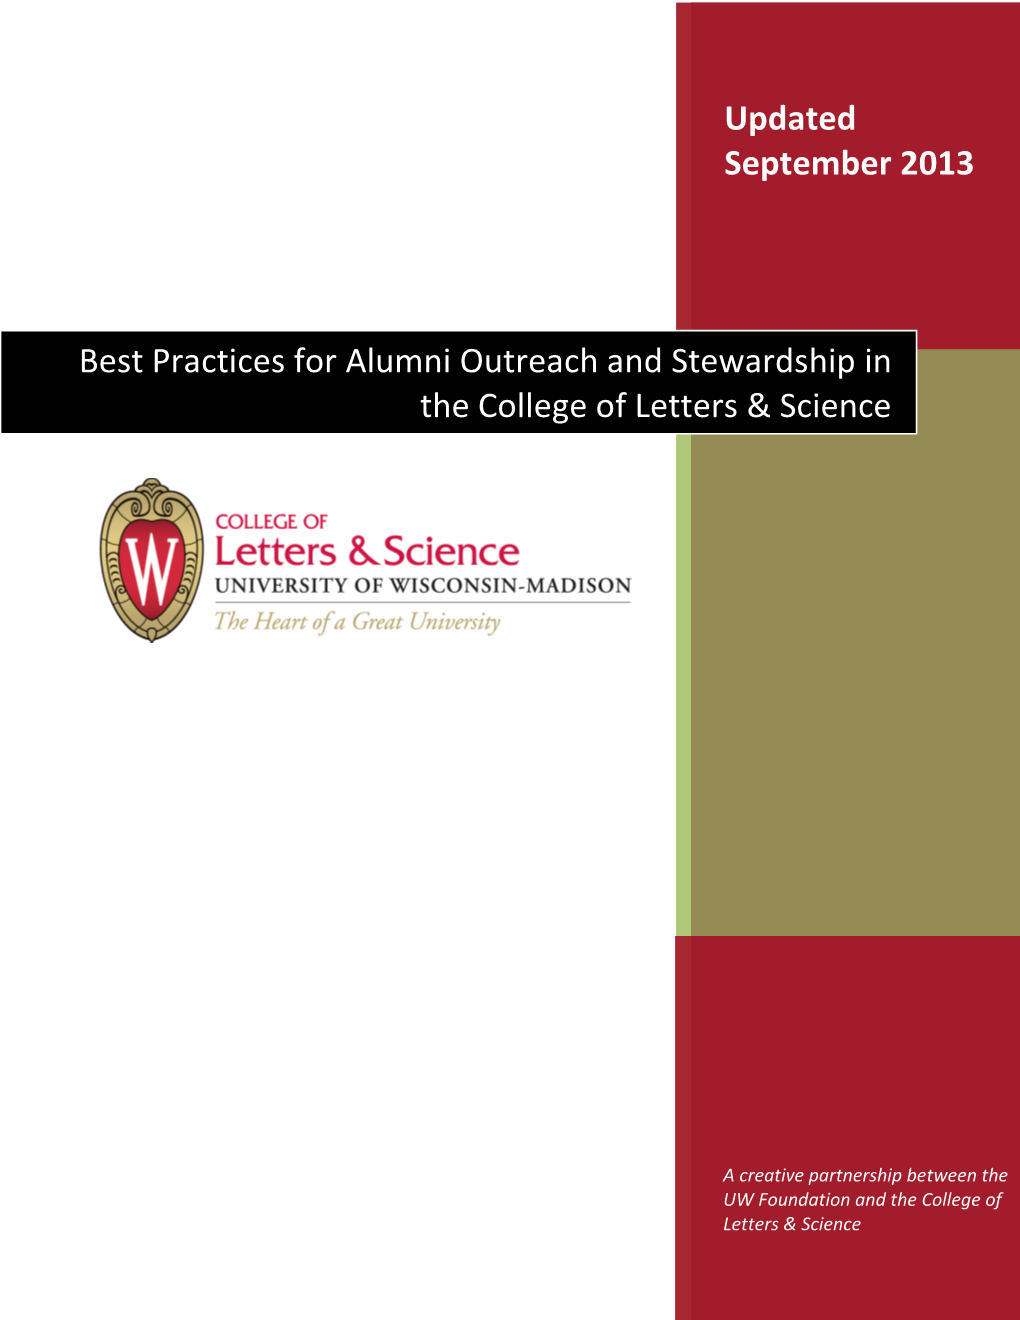 Best Practices for Alumni Outreach and Stewardship in the College of Letters & Science